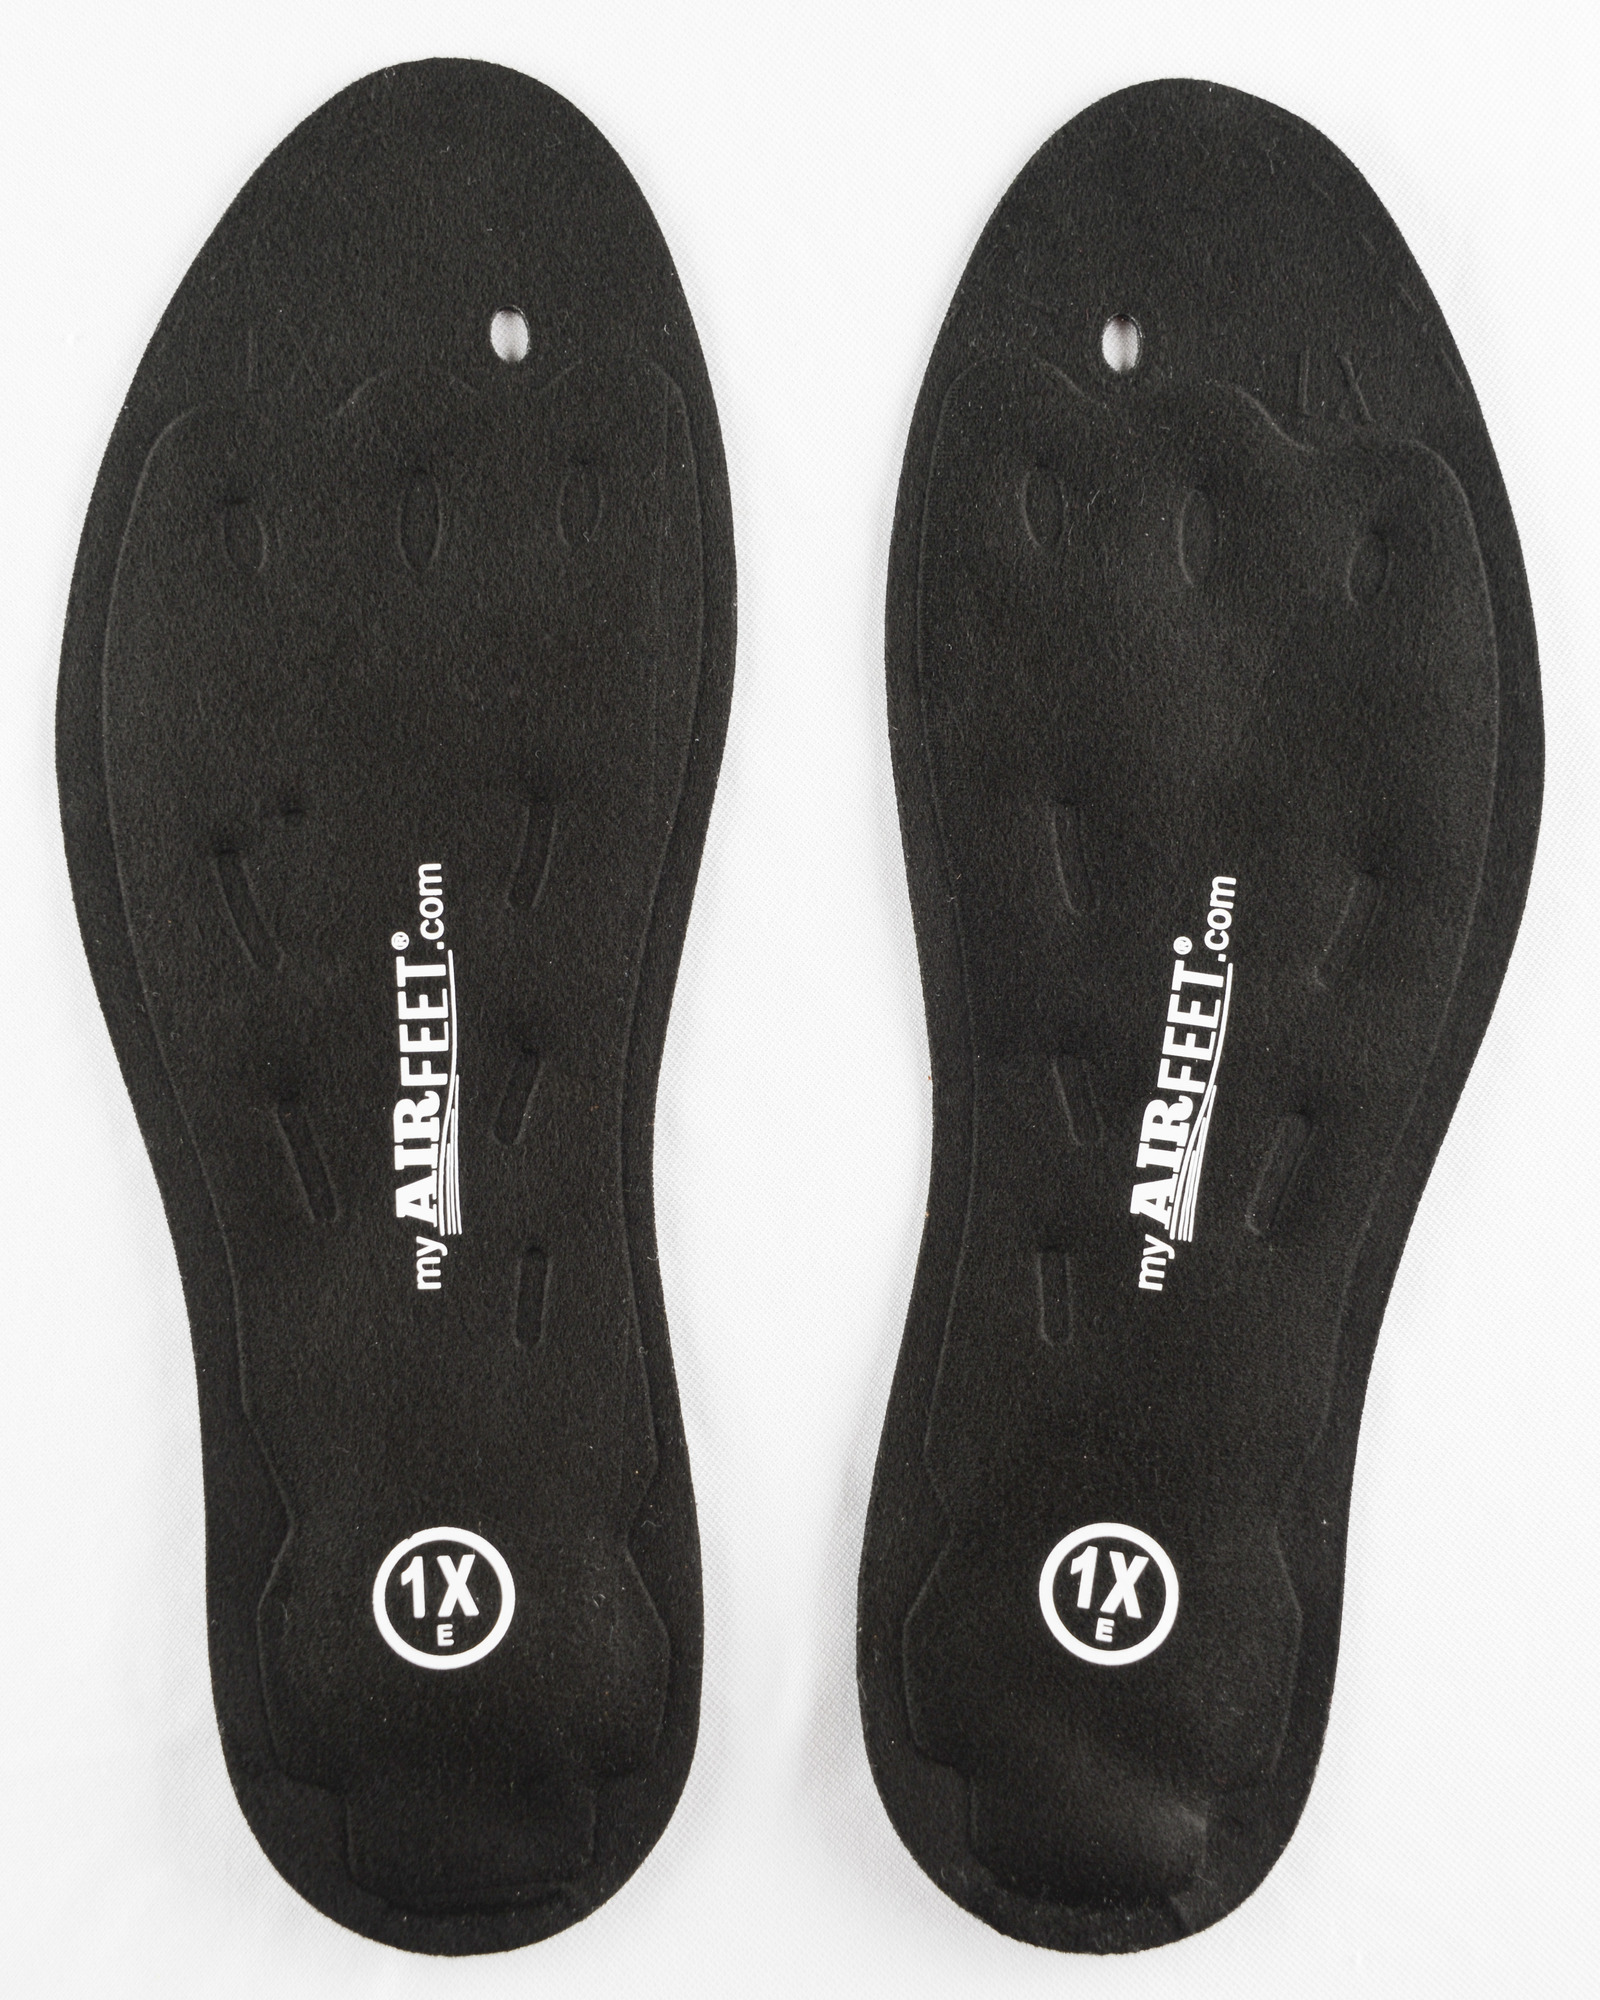 AirFeet CLASSIC Black Insoles, Size 2S 